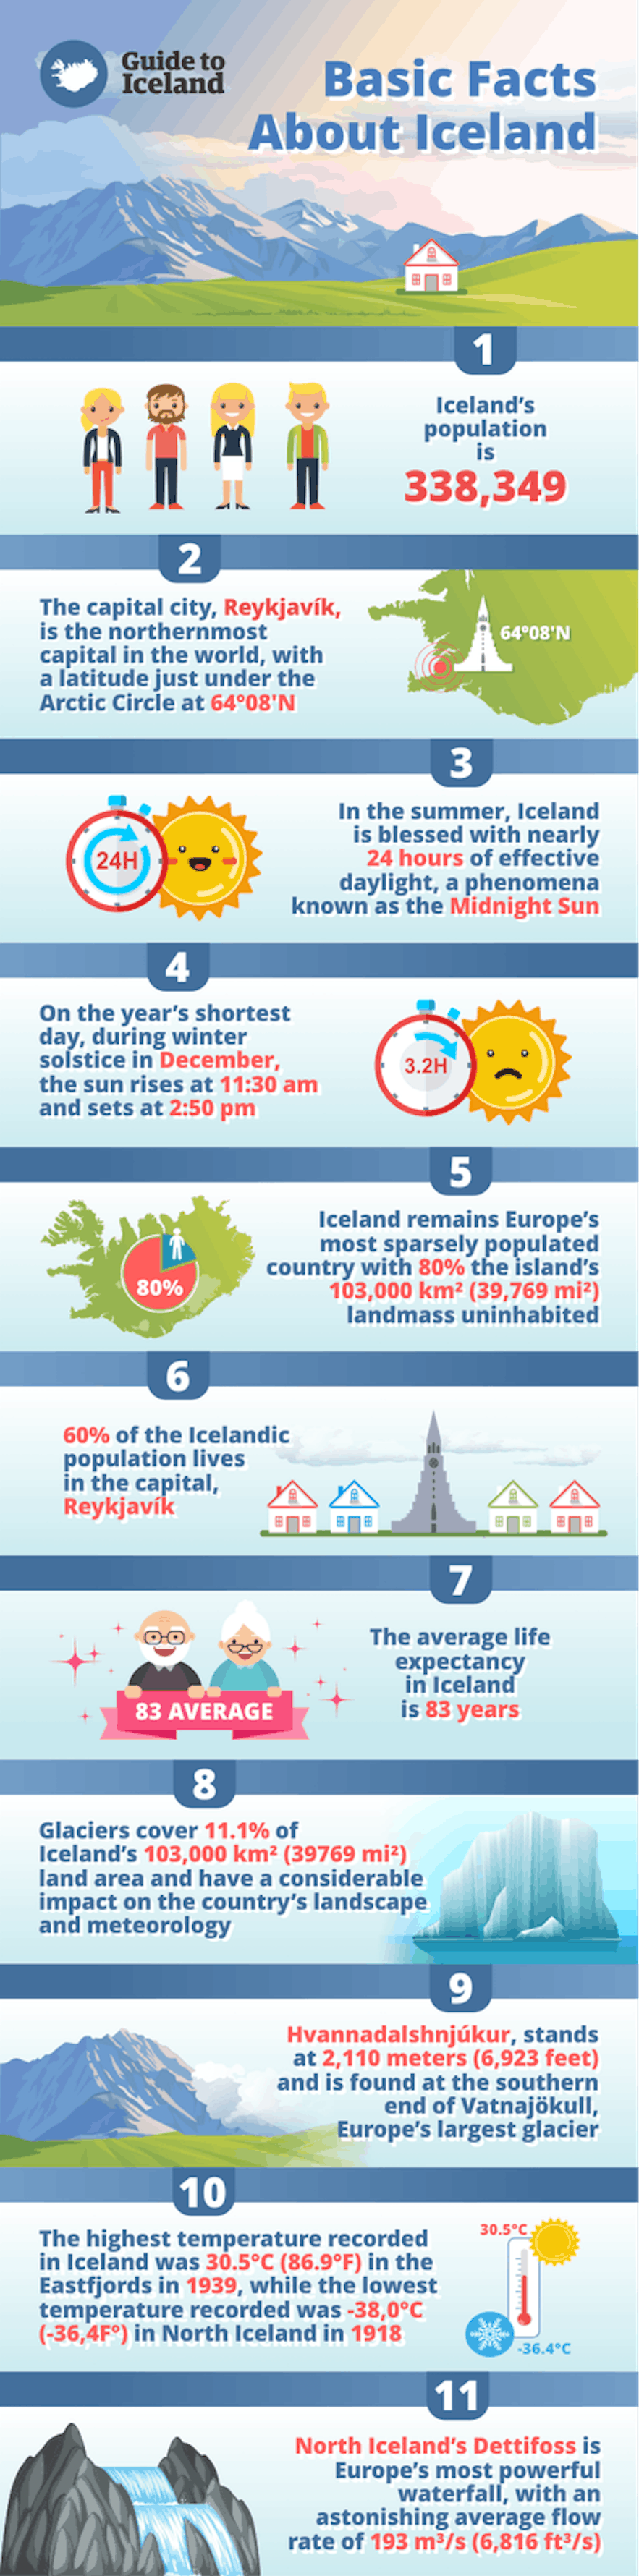 Though it may only a small country, Iceland knows how to top many of the world's statistics.